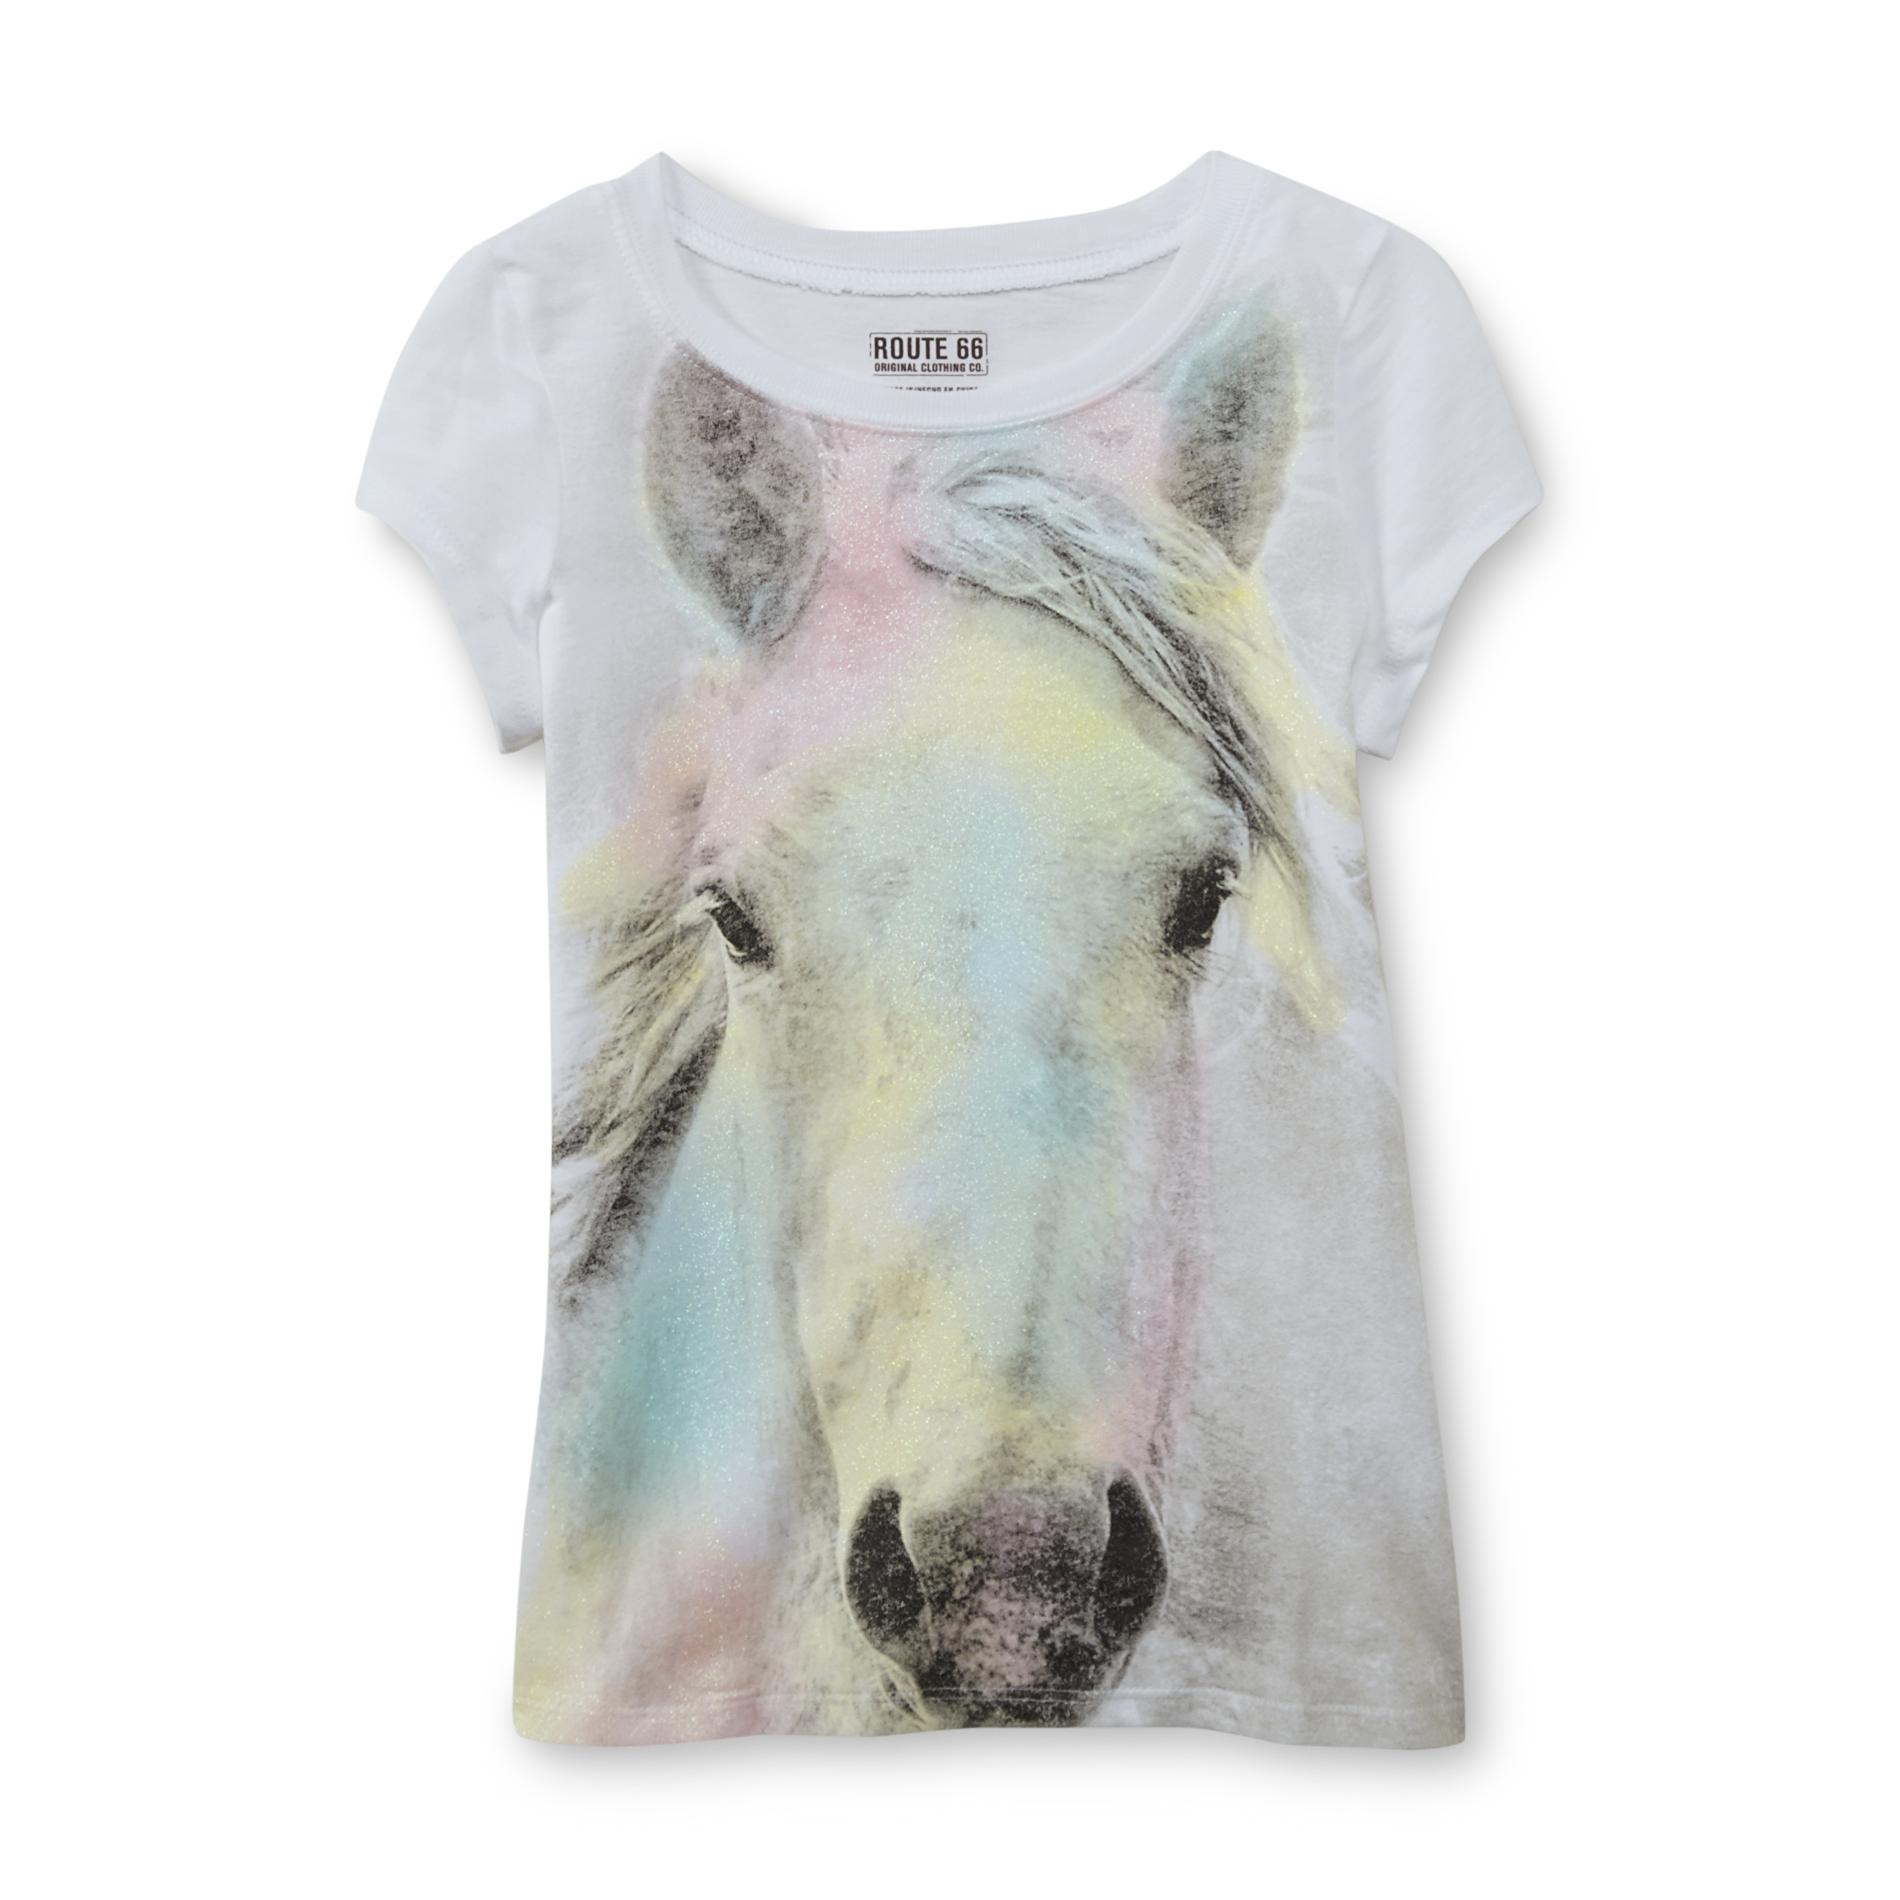 Route 66 Girl's Graphic T-Shirt - Wild Horse